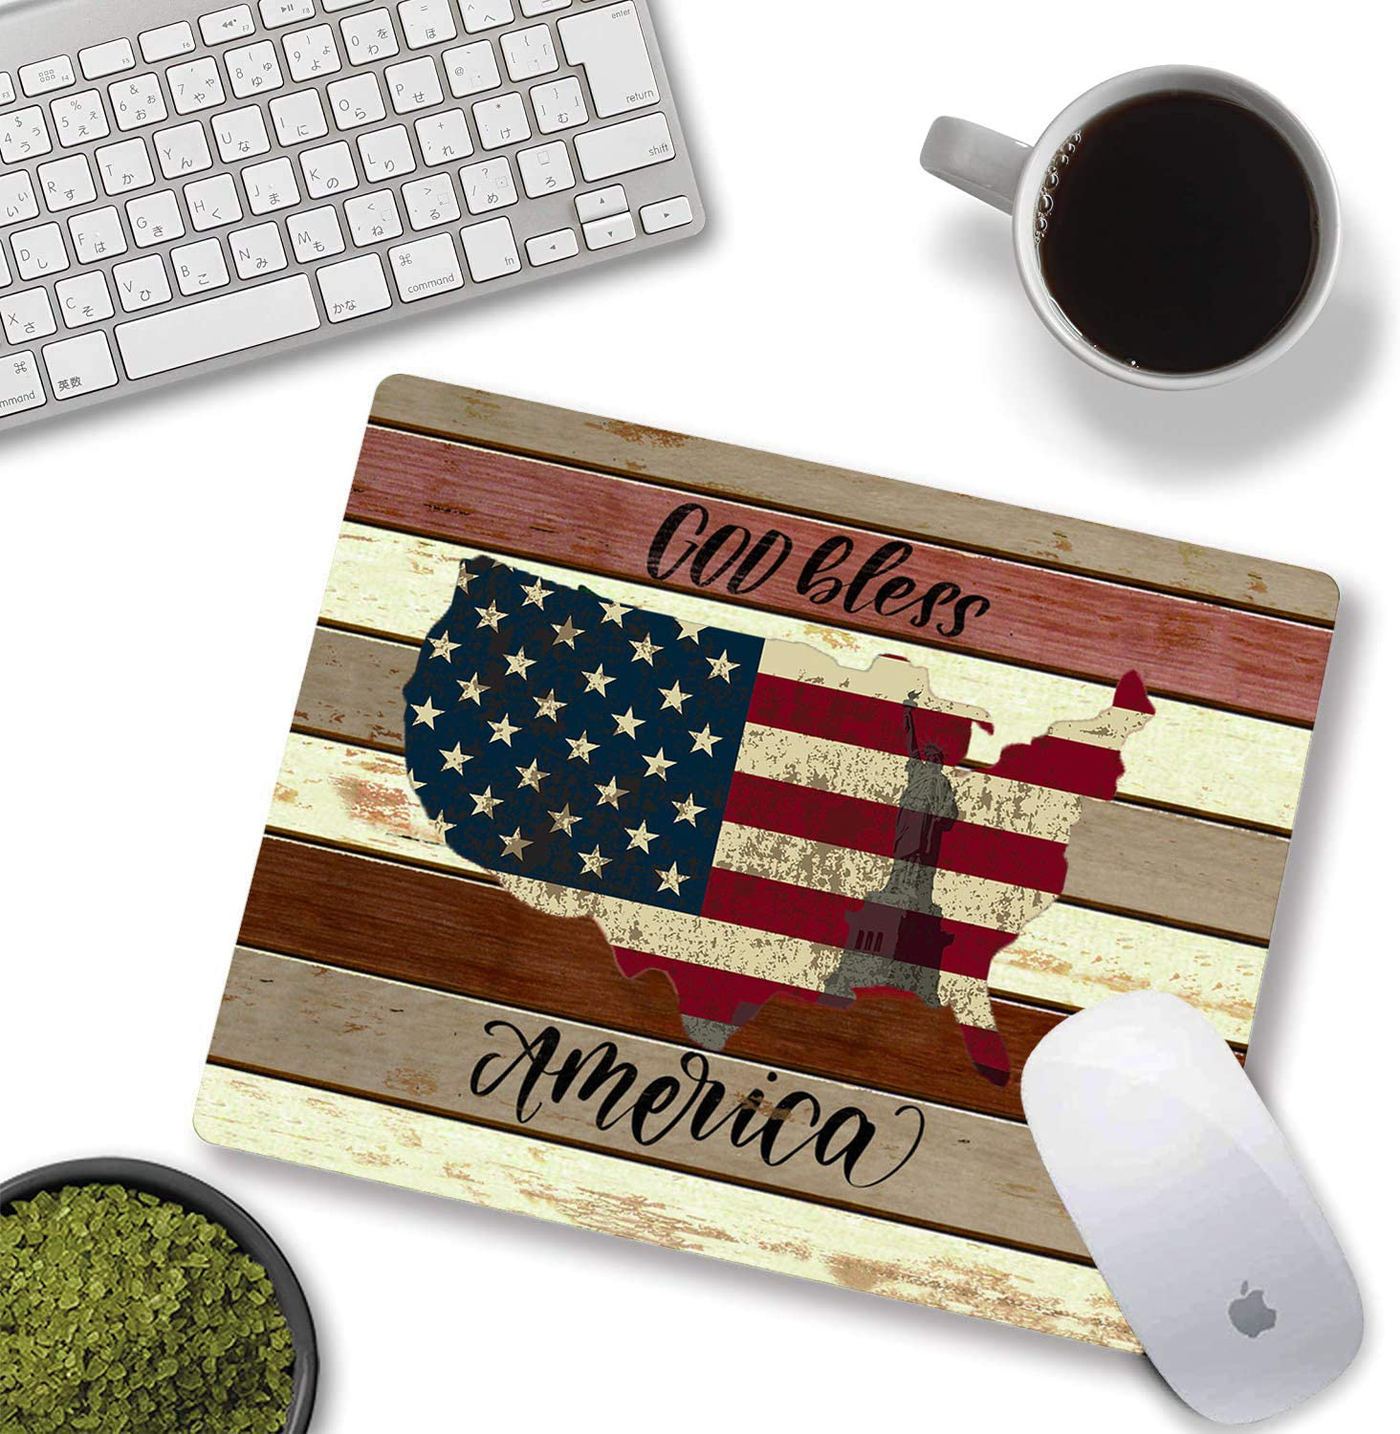 Mouse Pad,American Flag Vintage Art Wooden Wall Mouse Pad Rectangle Non-Slip Rubber Mousepad Office Accessories Desk Decor Mouse Pads for Computers Laptop（Good Bless America）